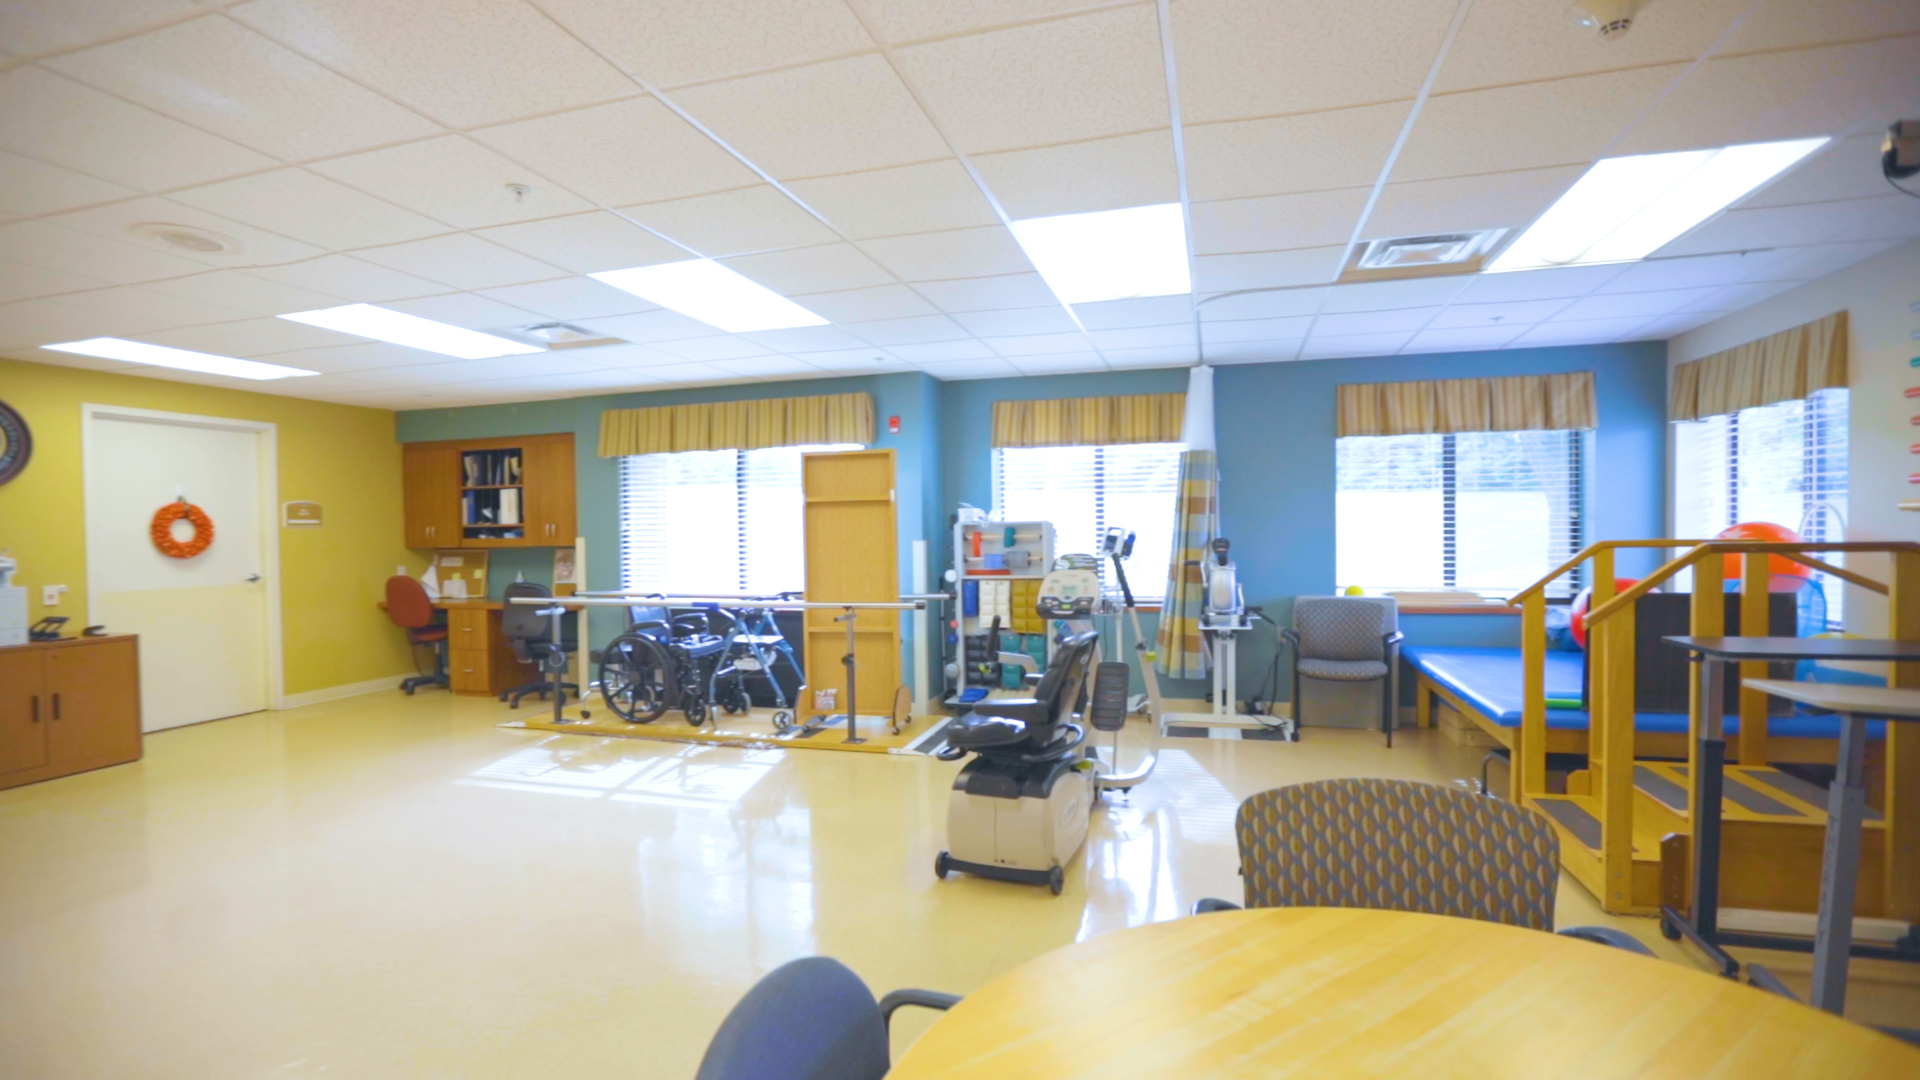 Therapy Room with therapy equipment. Four windows in the background with daylight shining through.